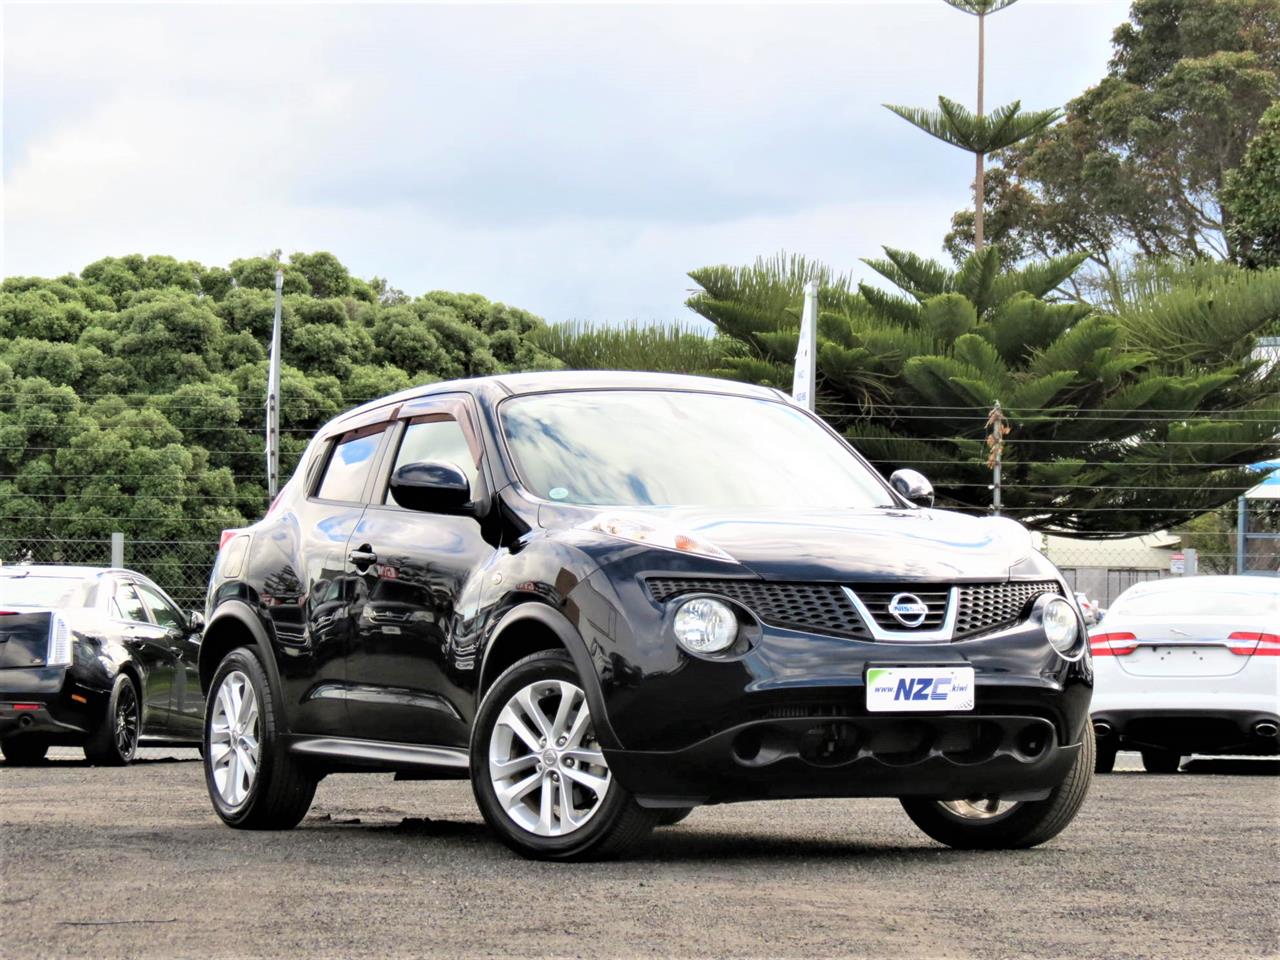 NZC 2011 Nissan JUKE just arrived to Auckland